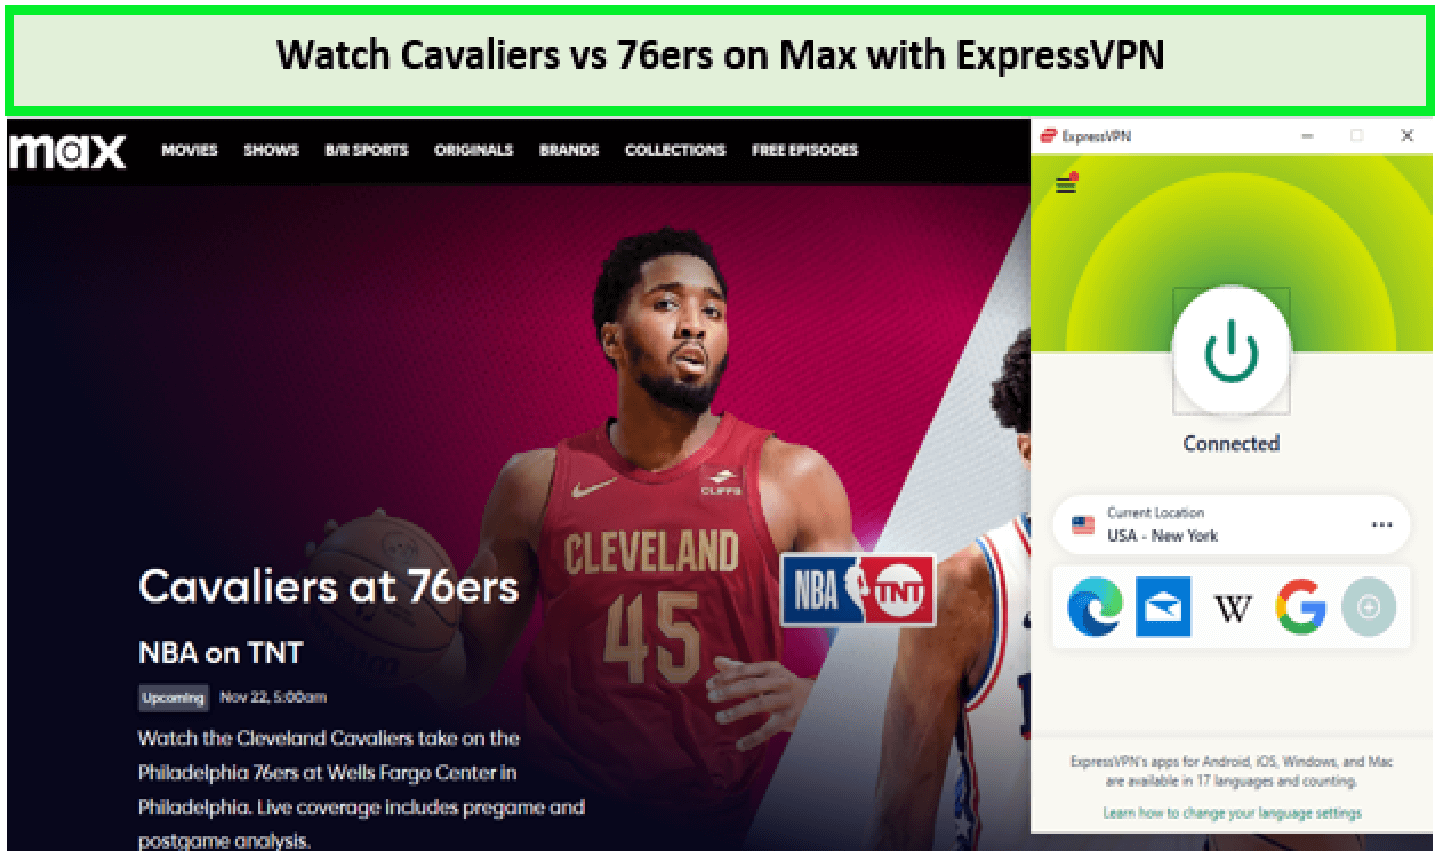 Watch-Cavaliers-vs-76ers-in-Australia-on-Max-with-ExpressVPN